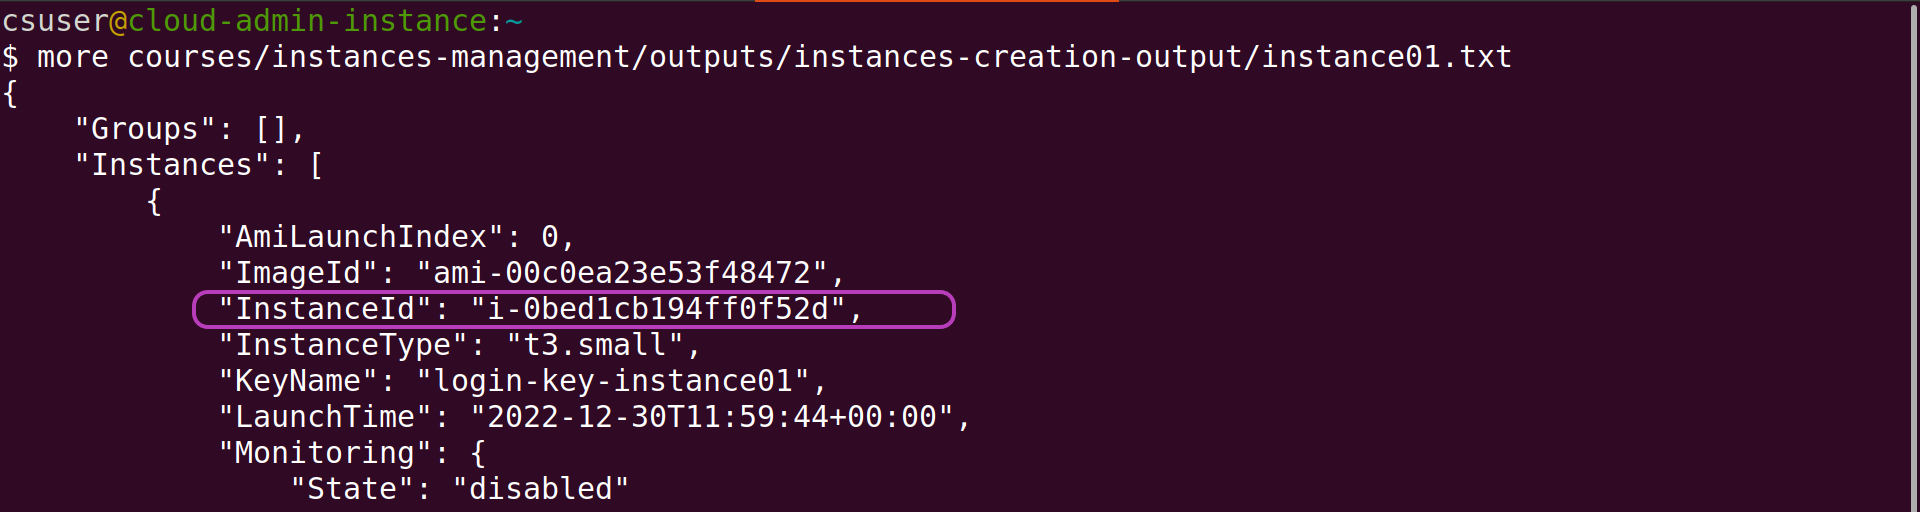 Screenshot of Linux terminal showing the run of the command "more courses/instances-management/outputs/instances-creation-output/instance01.txt" which displays the contents of that file, with the "InstanceID" field and its value circled.